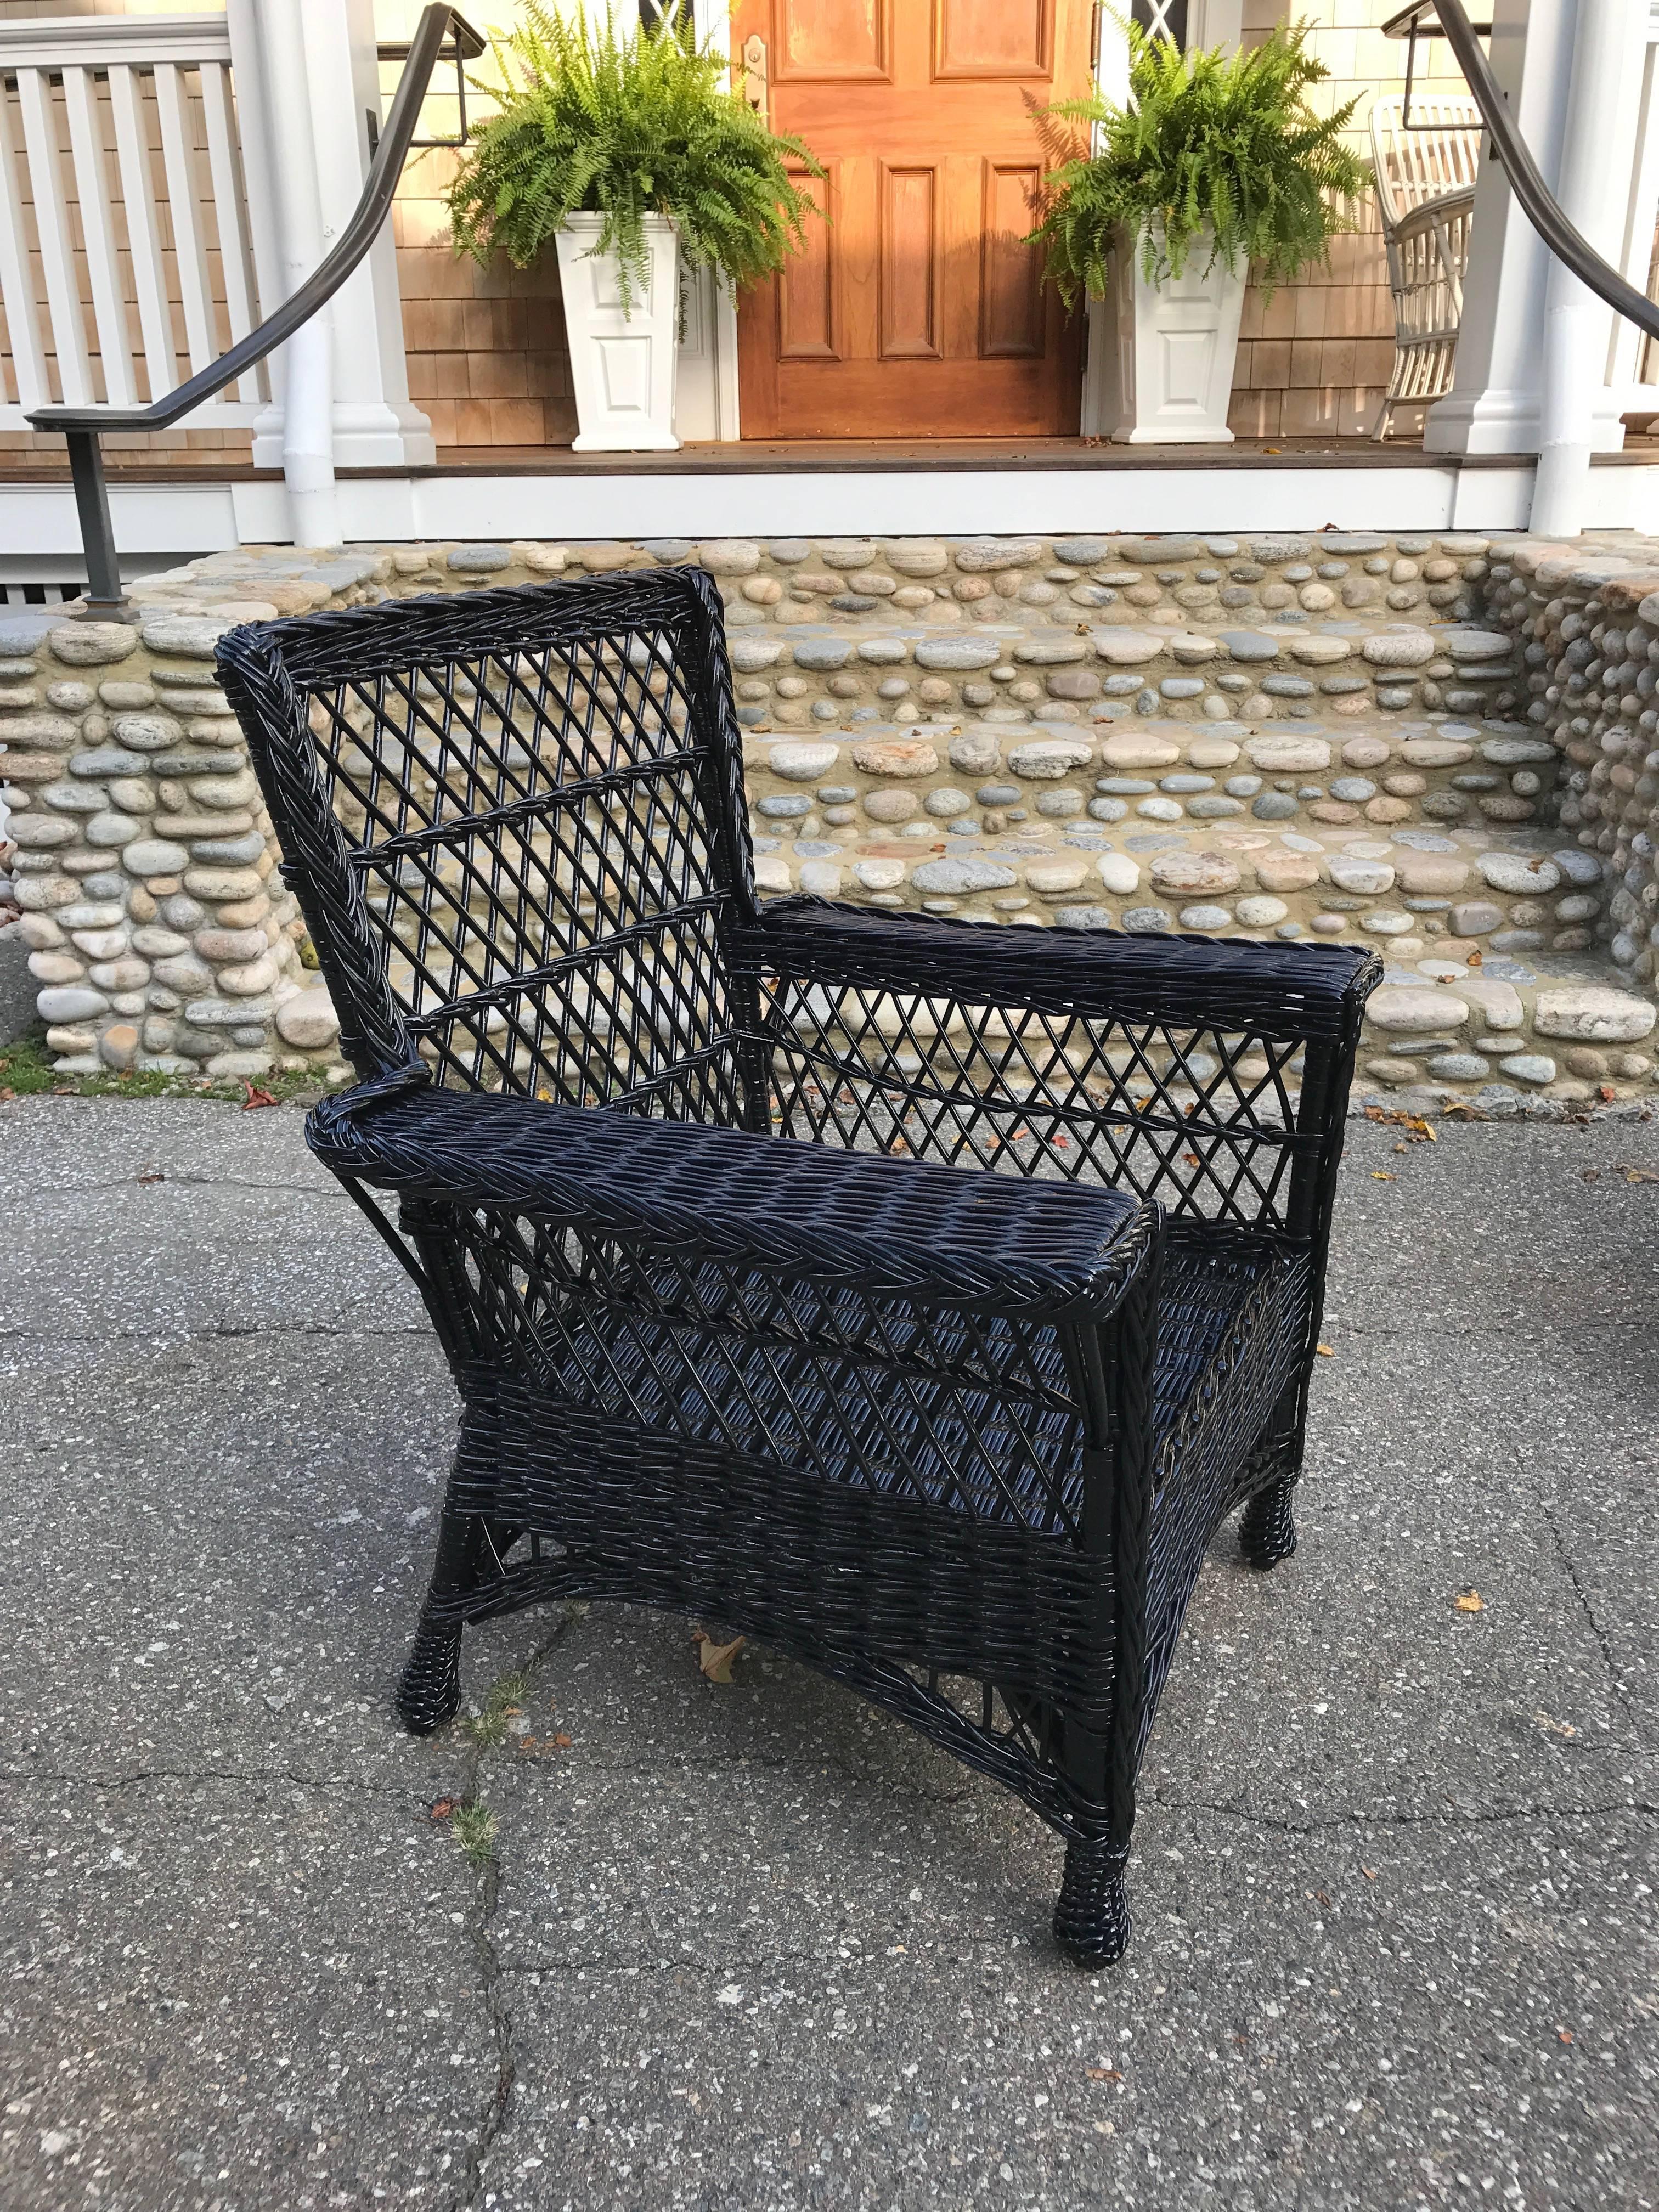 Early 20th Century Antique Bar Harbor Wicker Willow Chairs